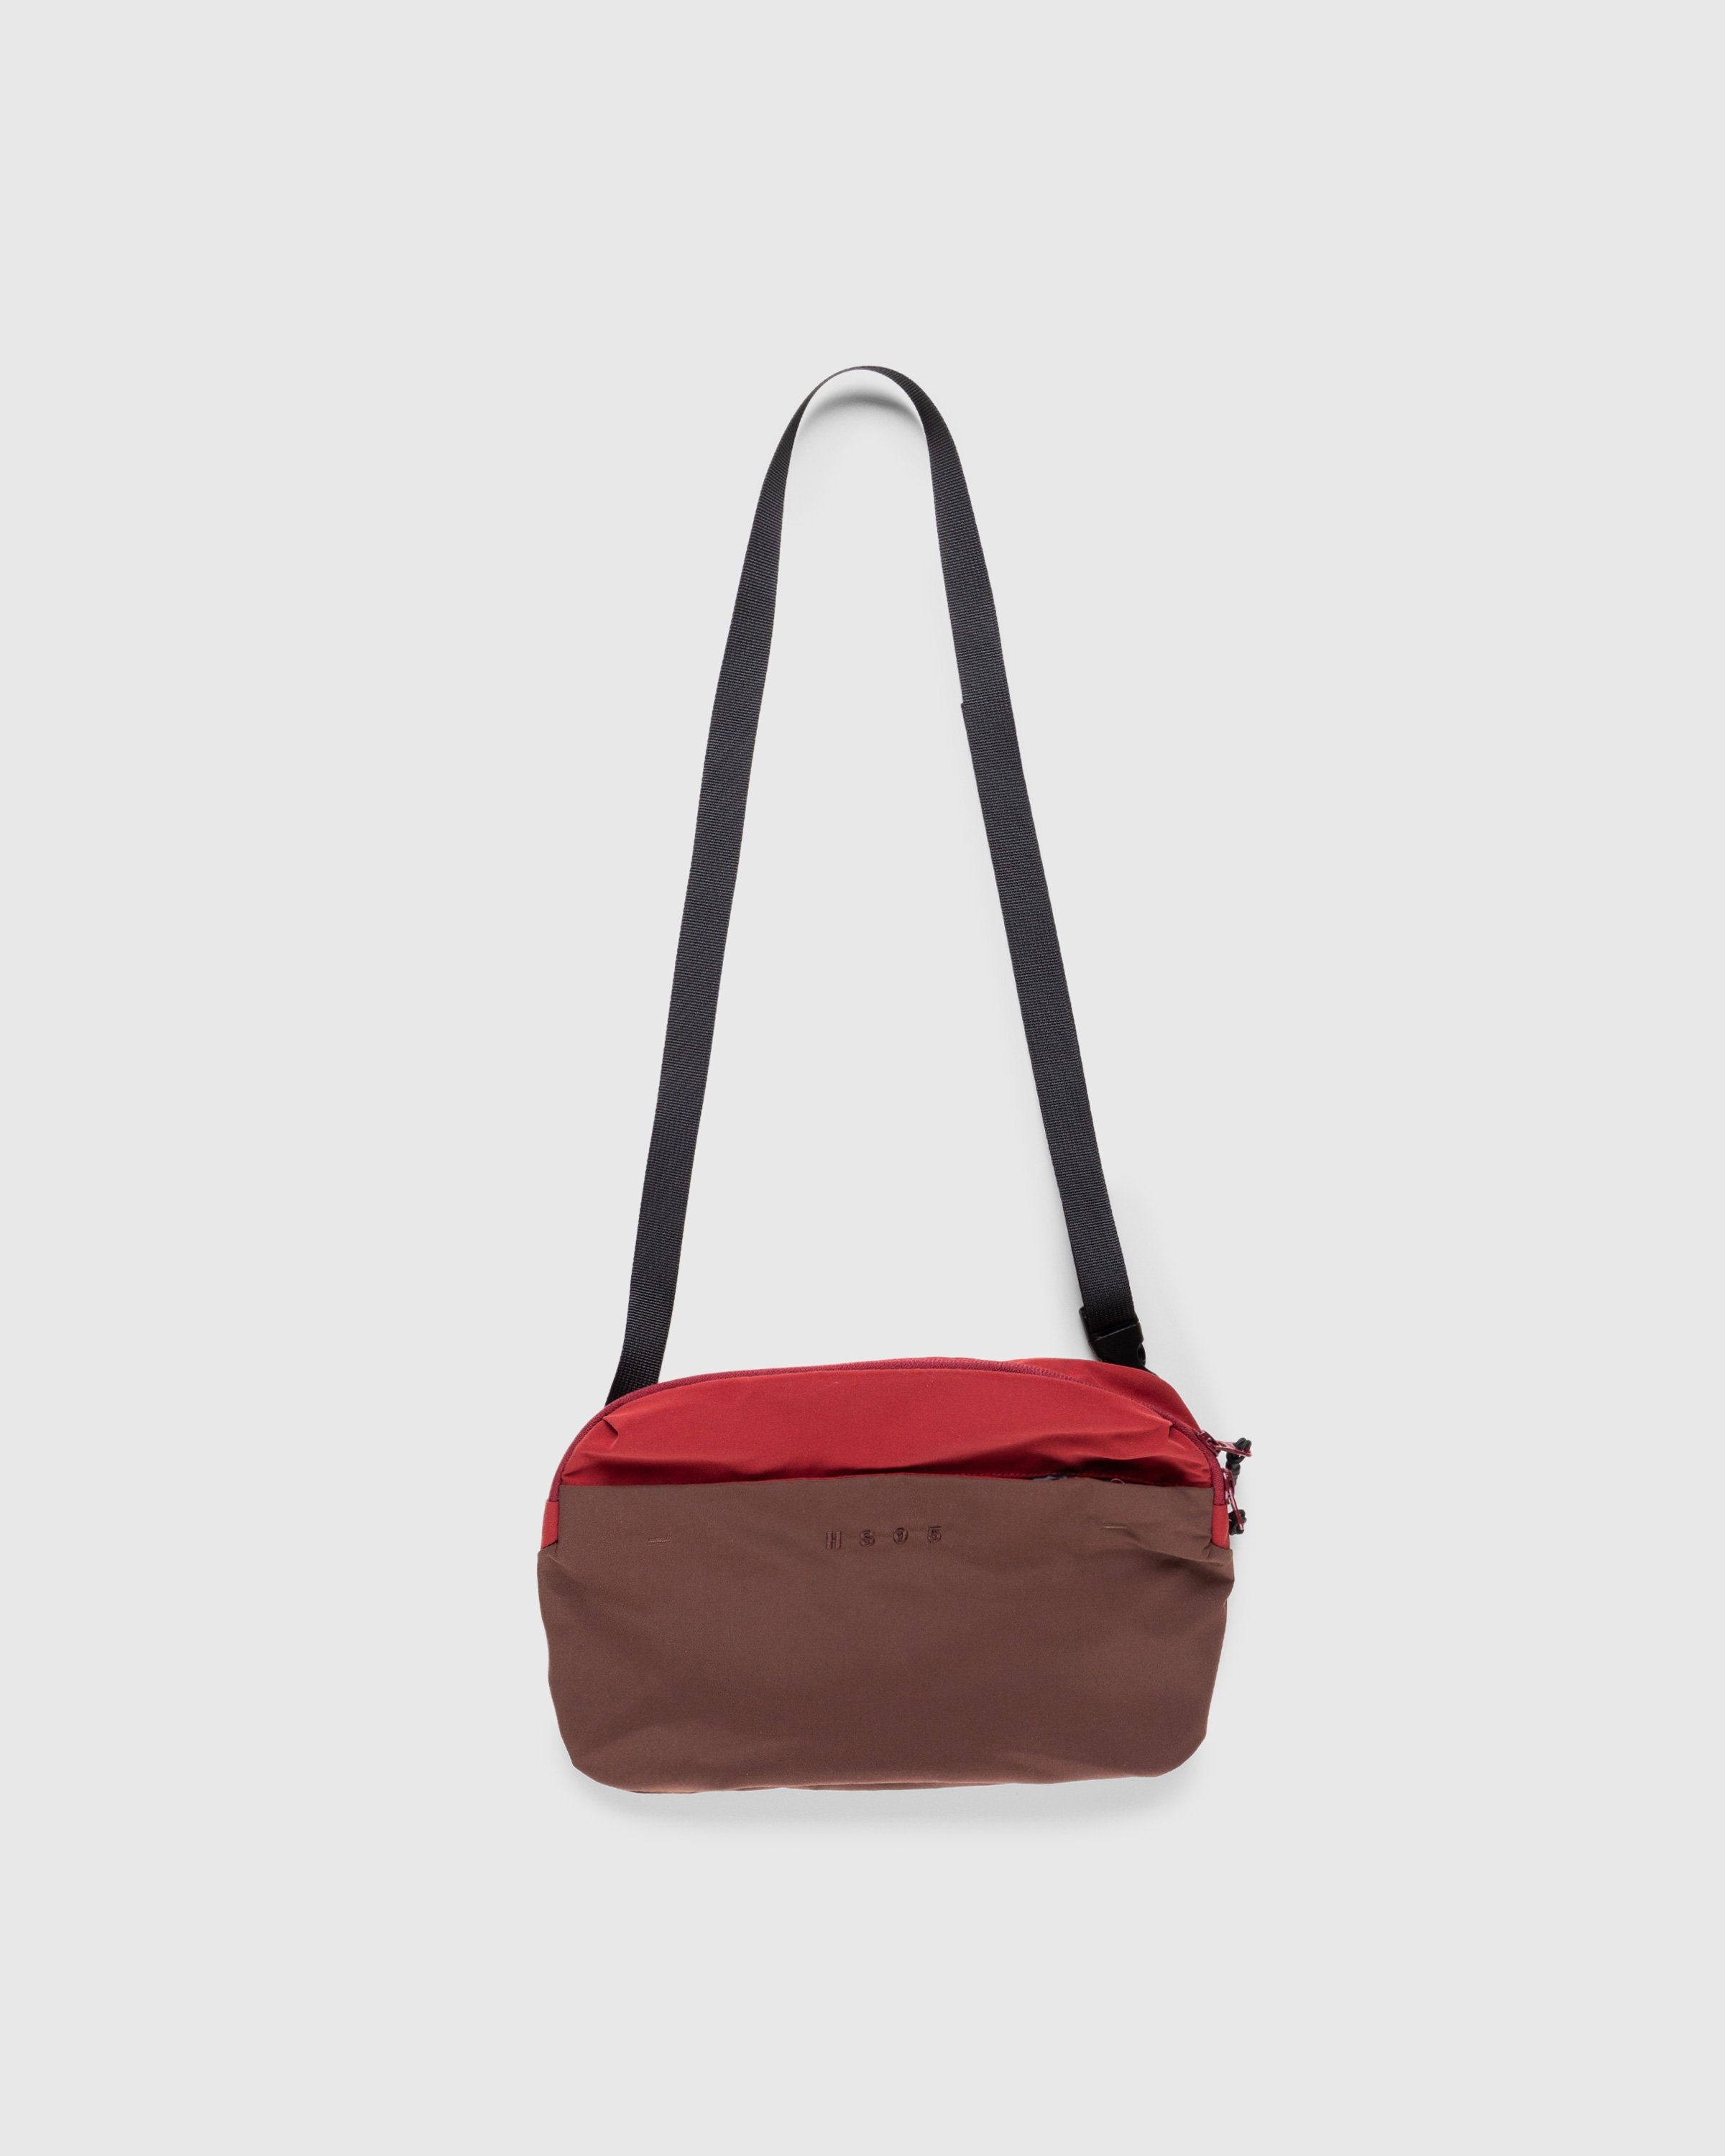 Highsnobiety HS05 – 3 Layer Nylon Side Bag Red - Bags - Red - Image 1